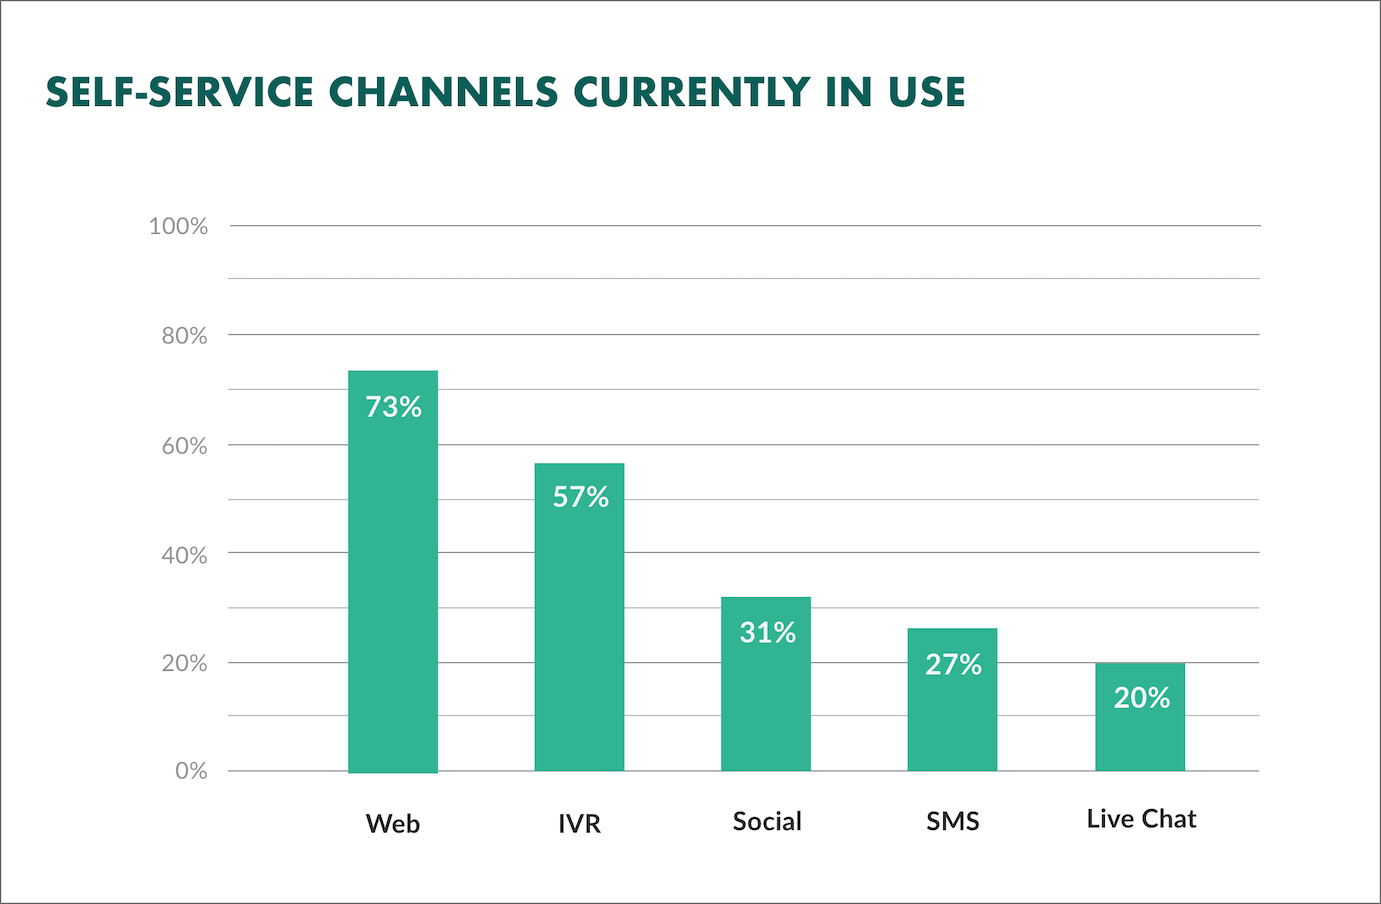 Self-service channels currently in use